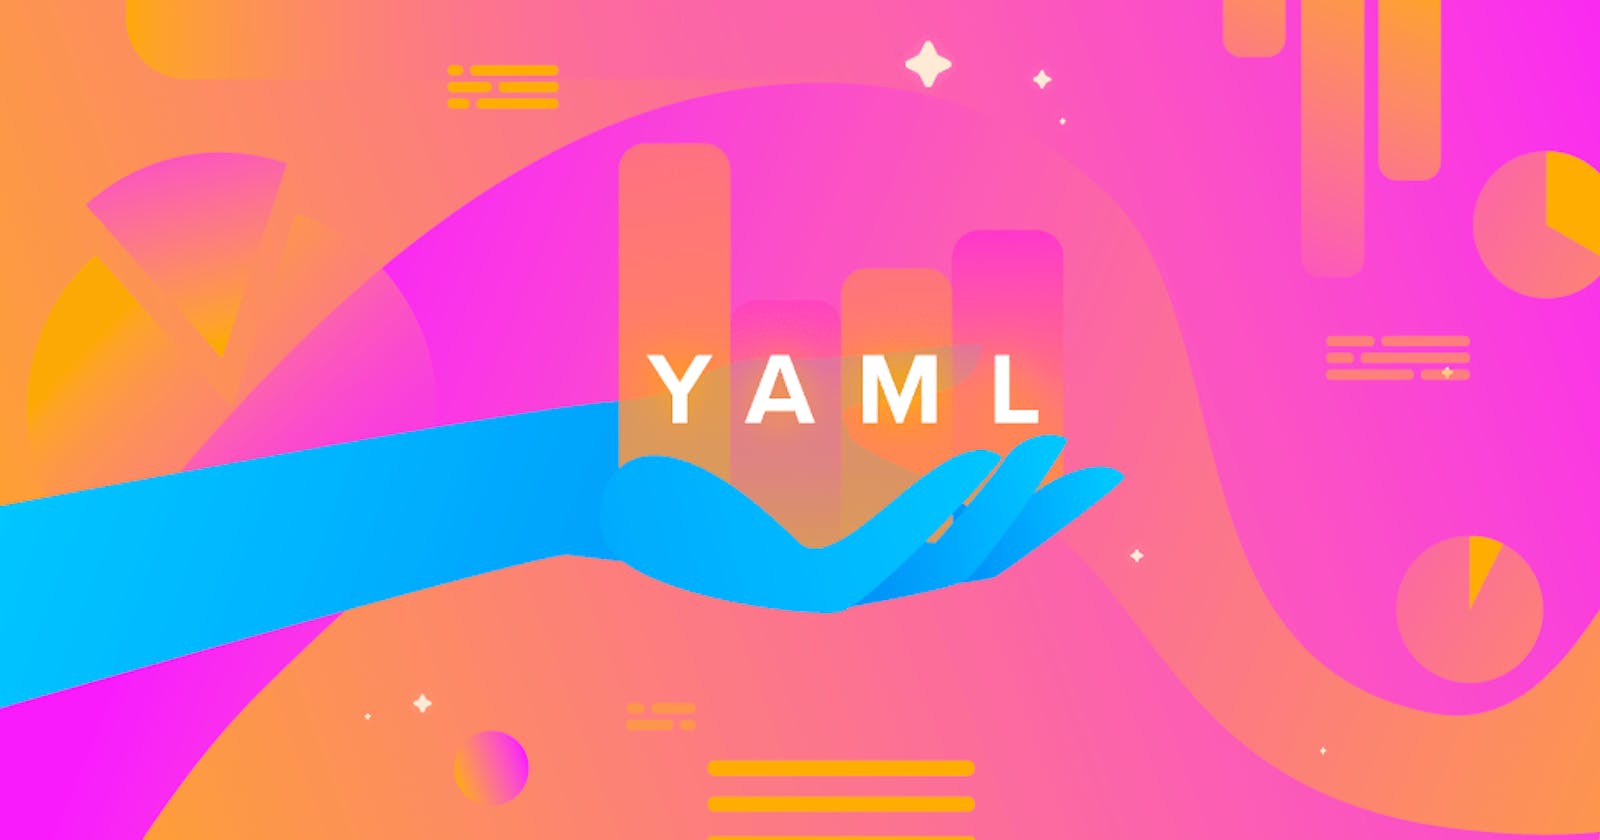 YAML: The Simple and Powerful Configuration Language